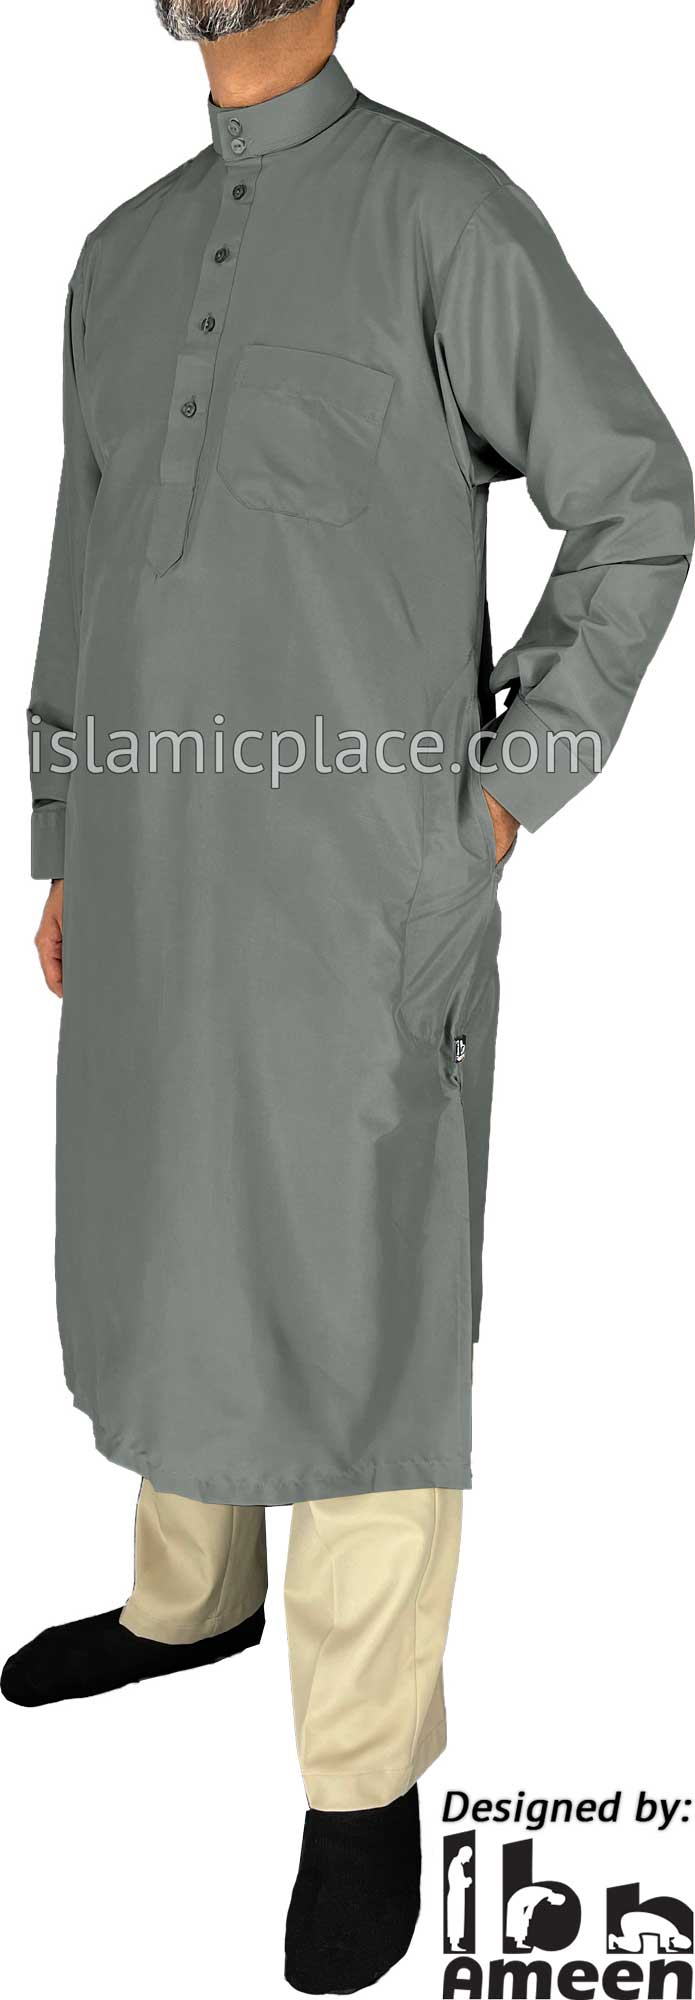 Steel Gray - Men Saudi Ad-Daffah Plain Kameez by Ibn Ameen with Visible Buttons